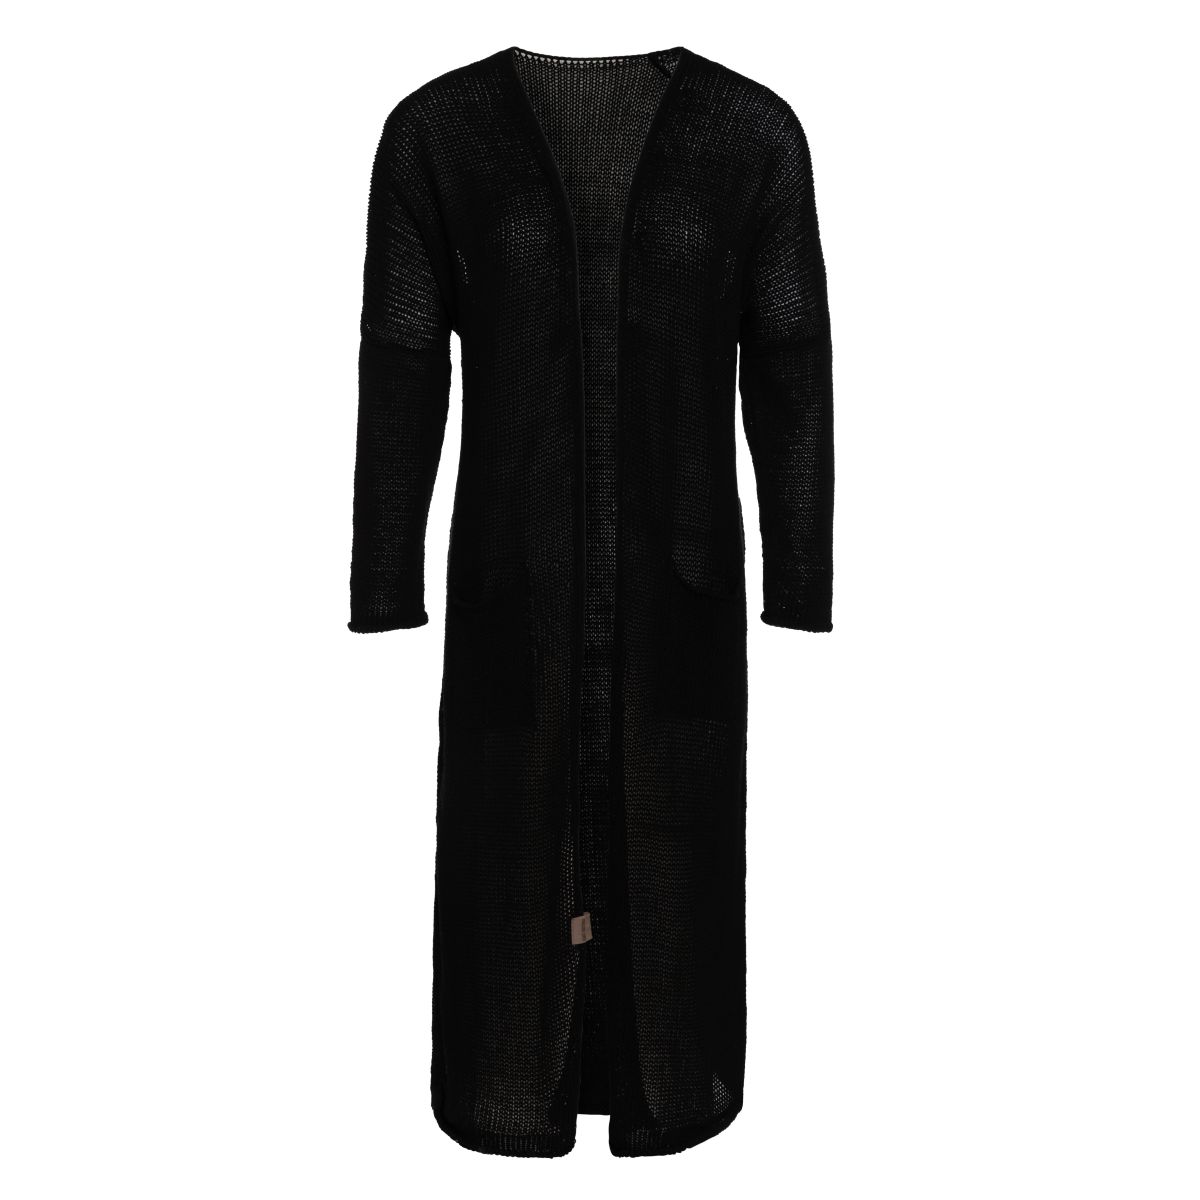 jasmin long knitted cardigan black 3638 with side pockets